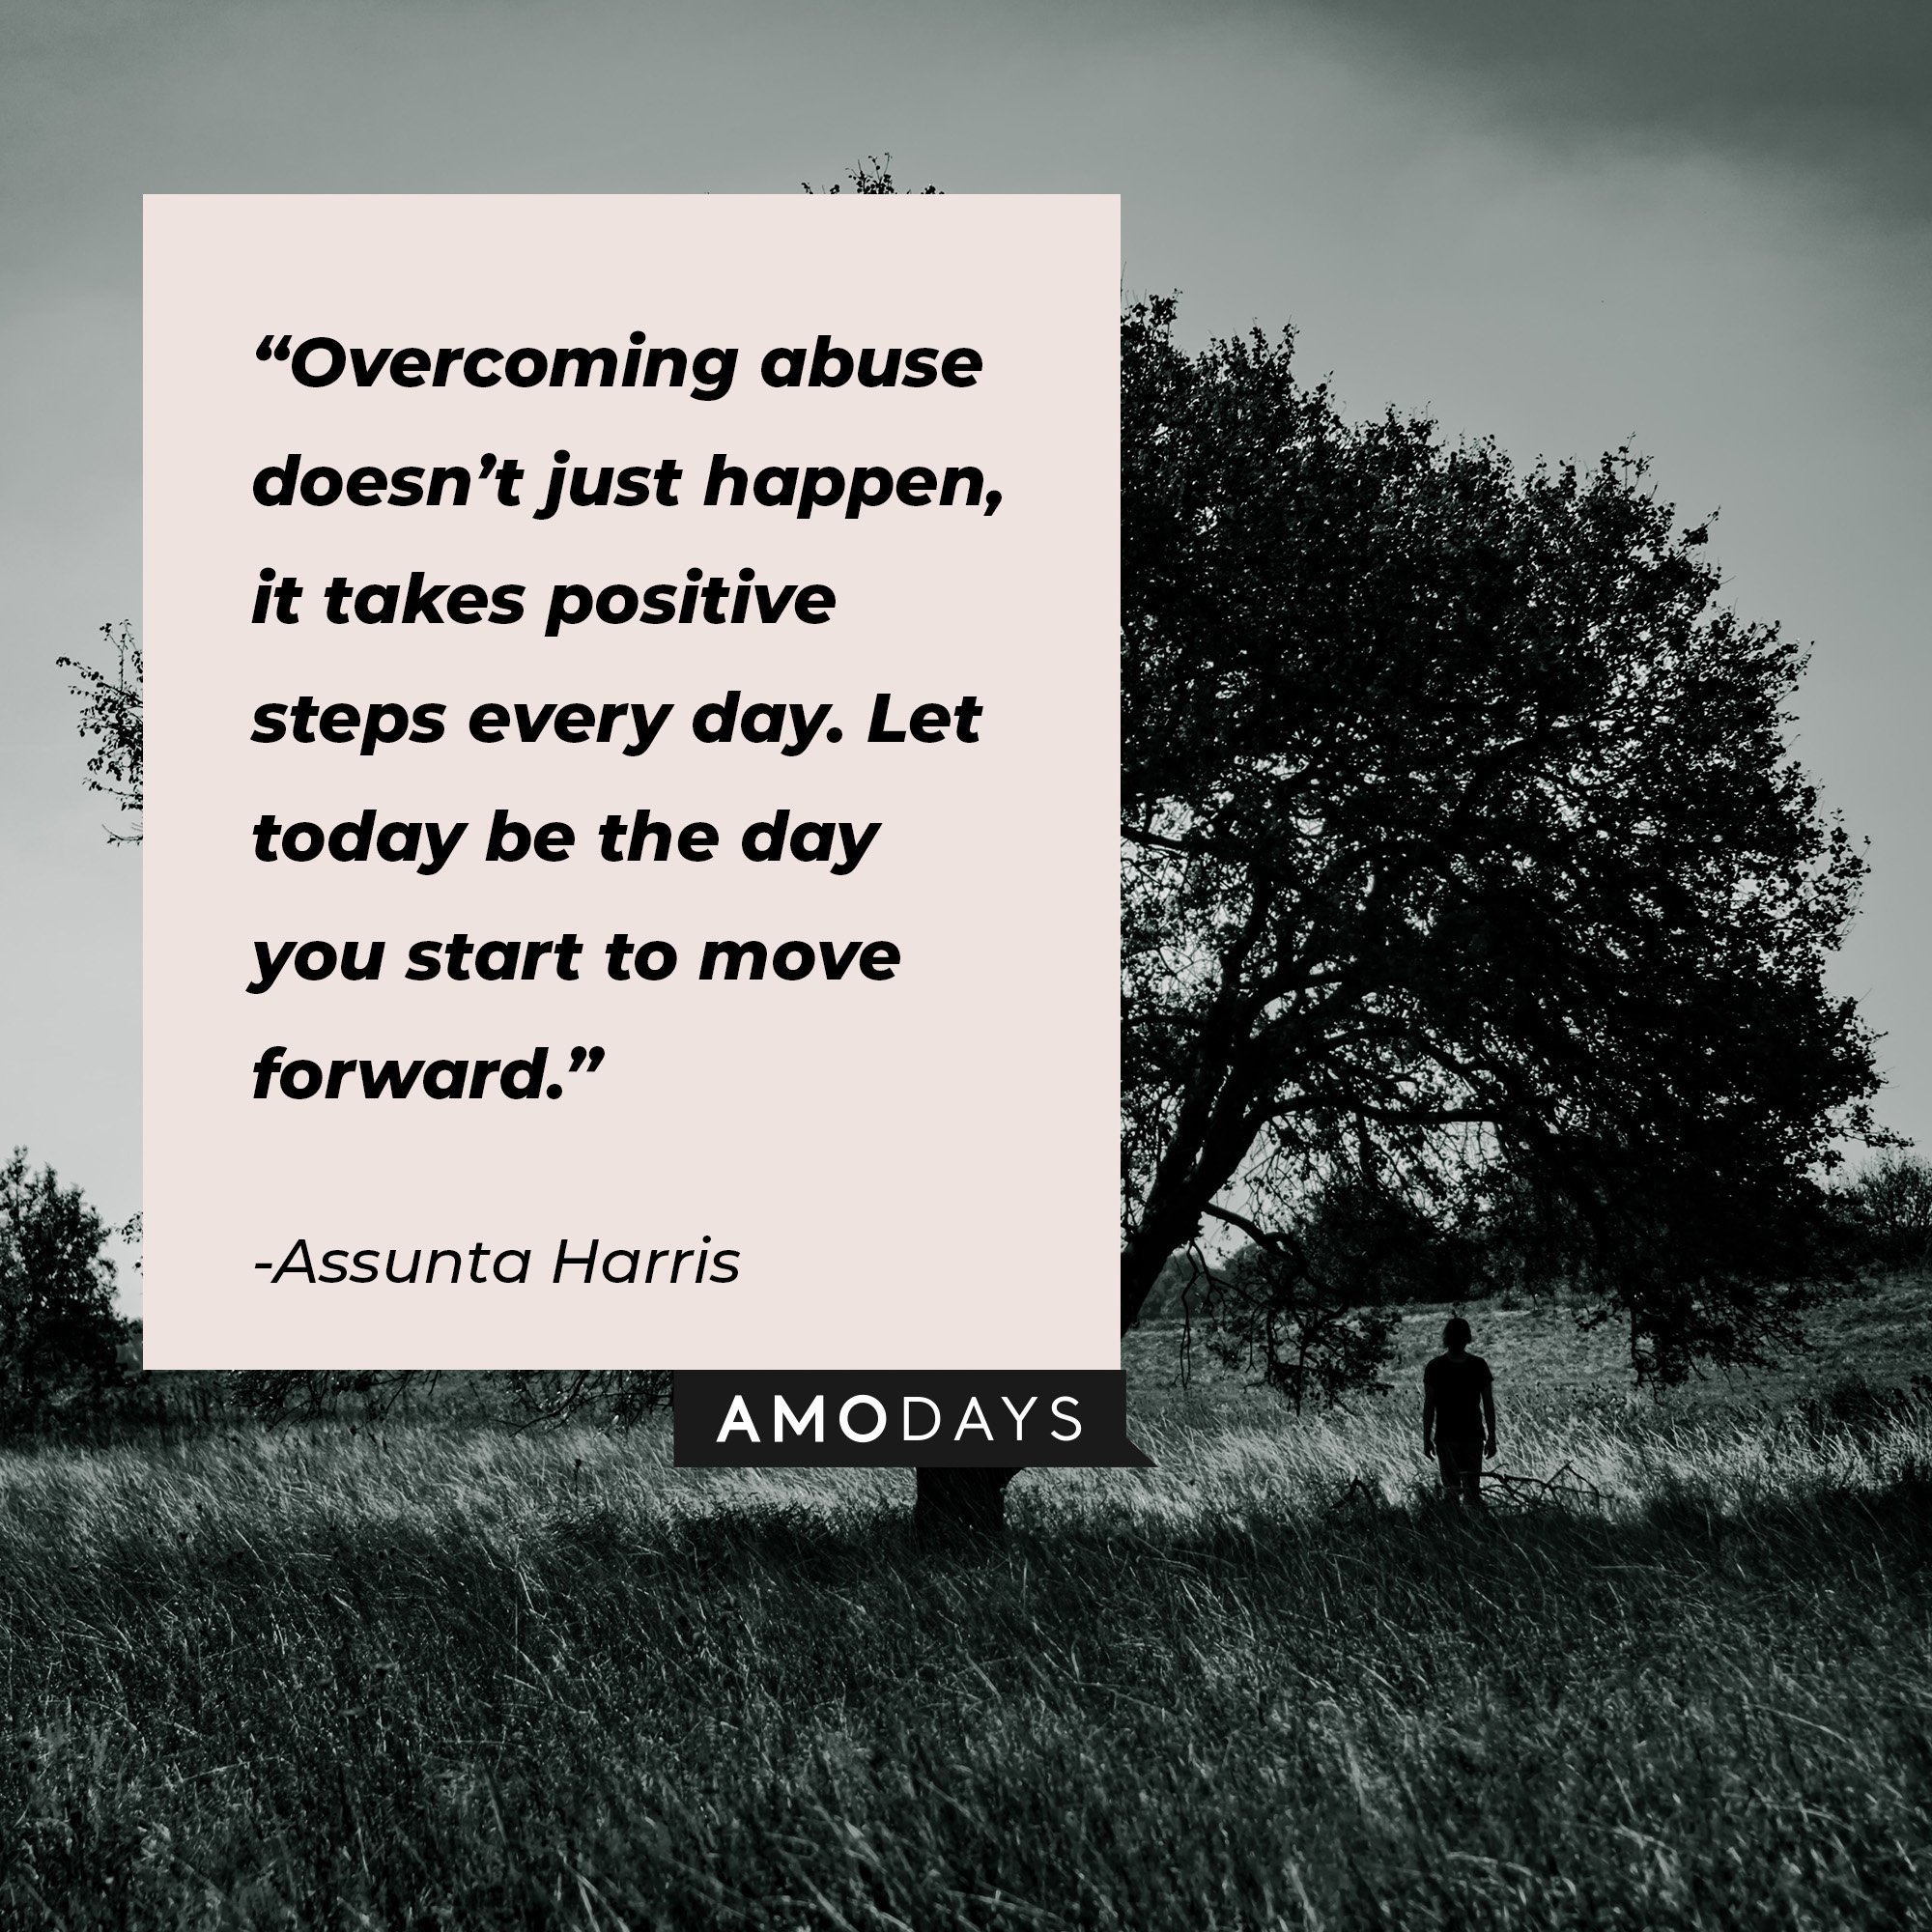  Assunta Harris’ quote: "Overcoming abuse doesn’t just happen, it takes positive steps every day. Let today be the day you start to move forward.” | Image: AmoDays   